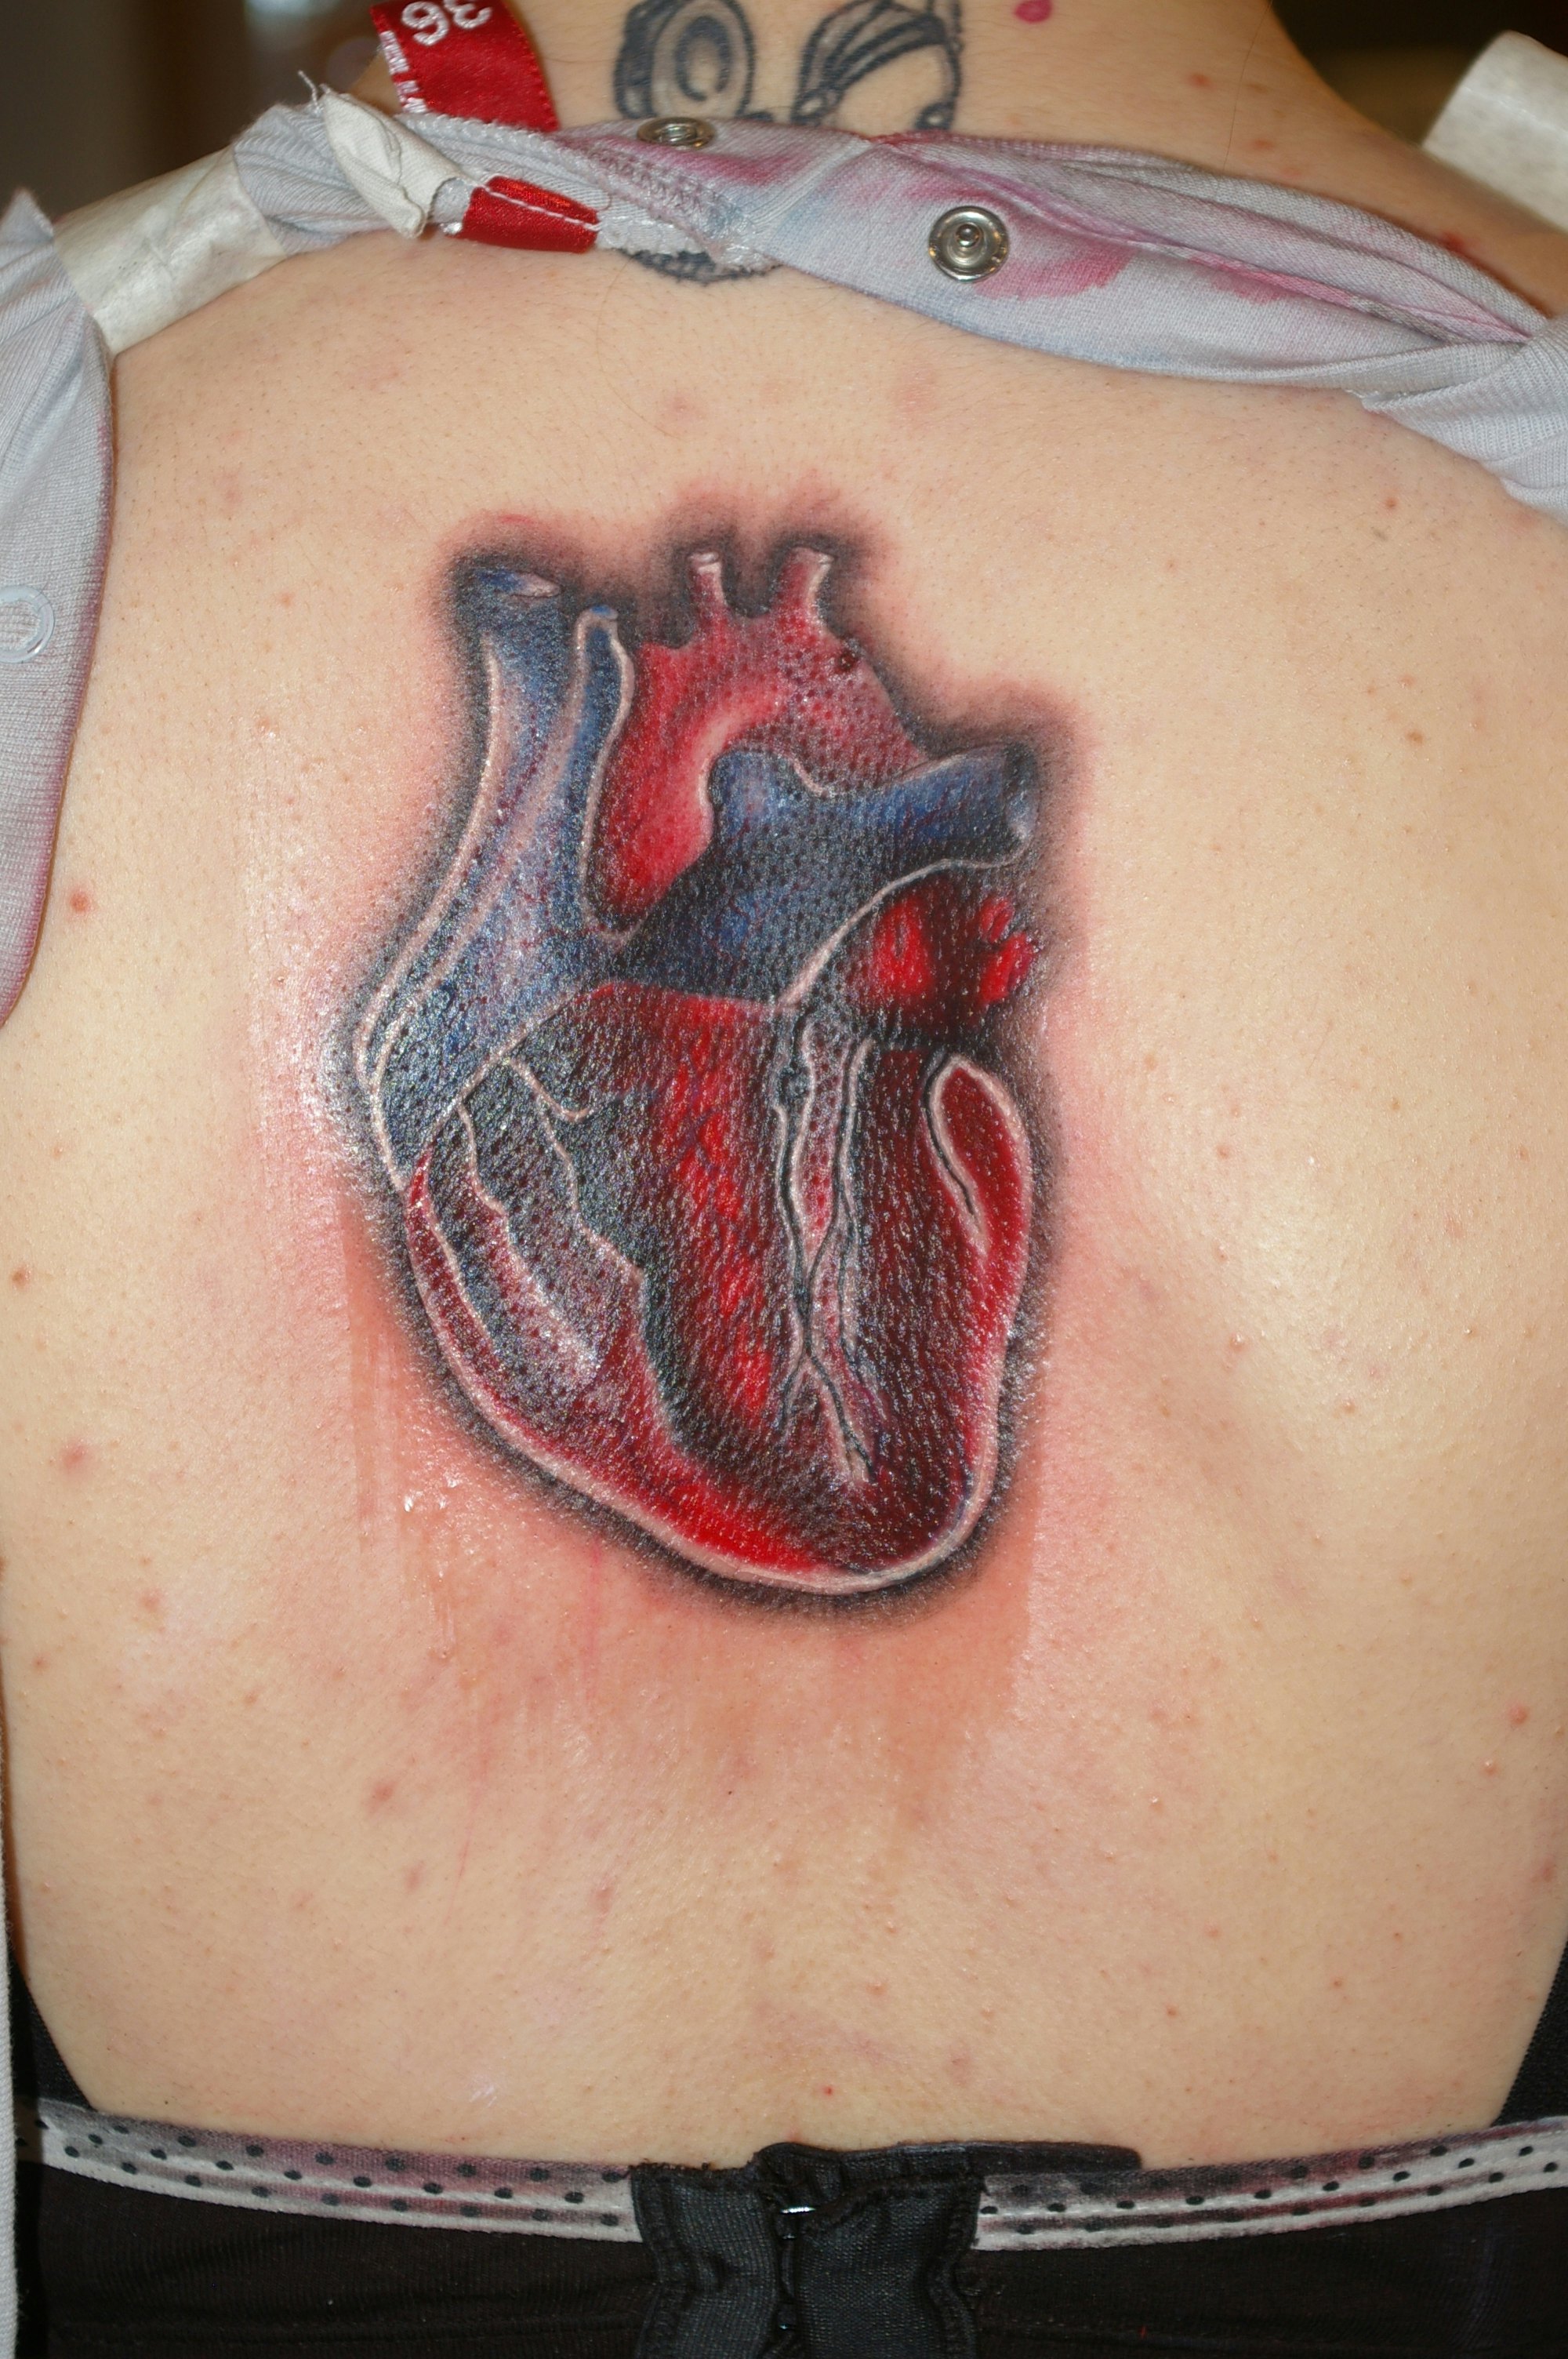 Wear Your Heart on Your Sleeve with These Anatomical Heart Tattoos   Tattoodo